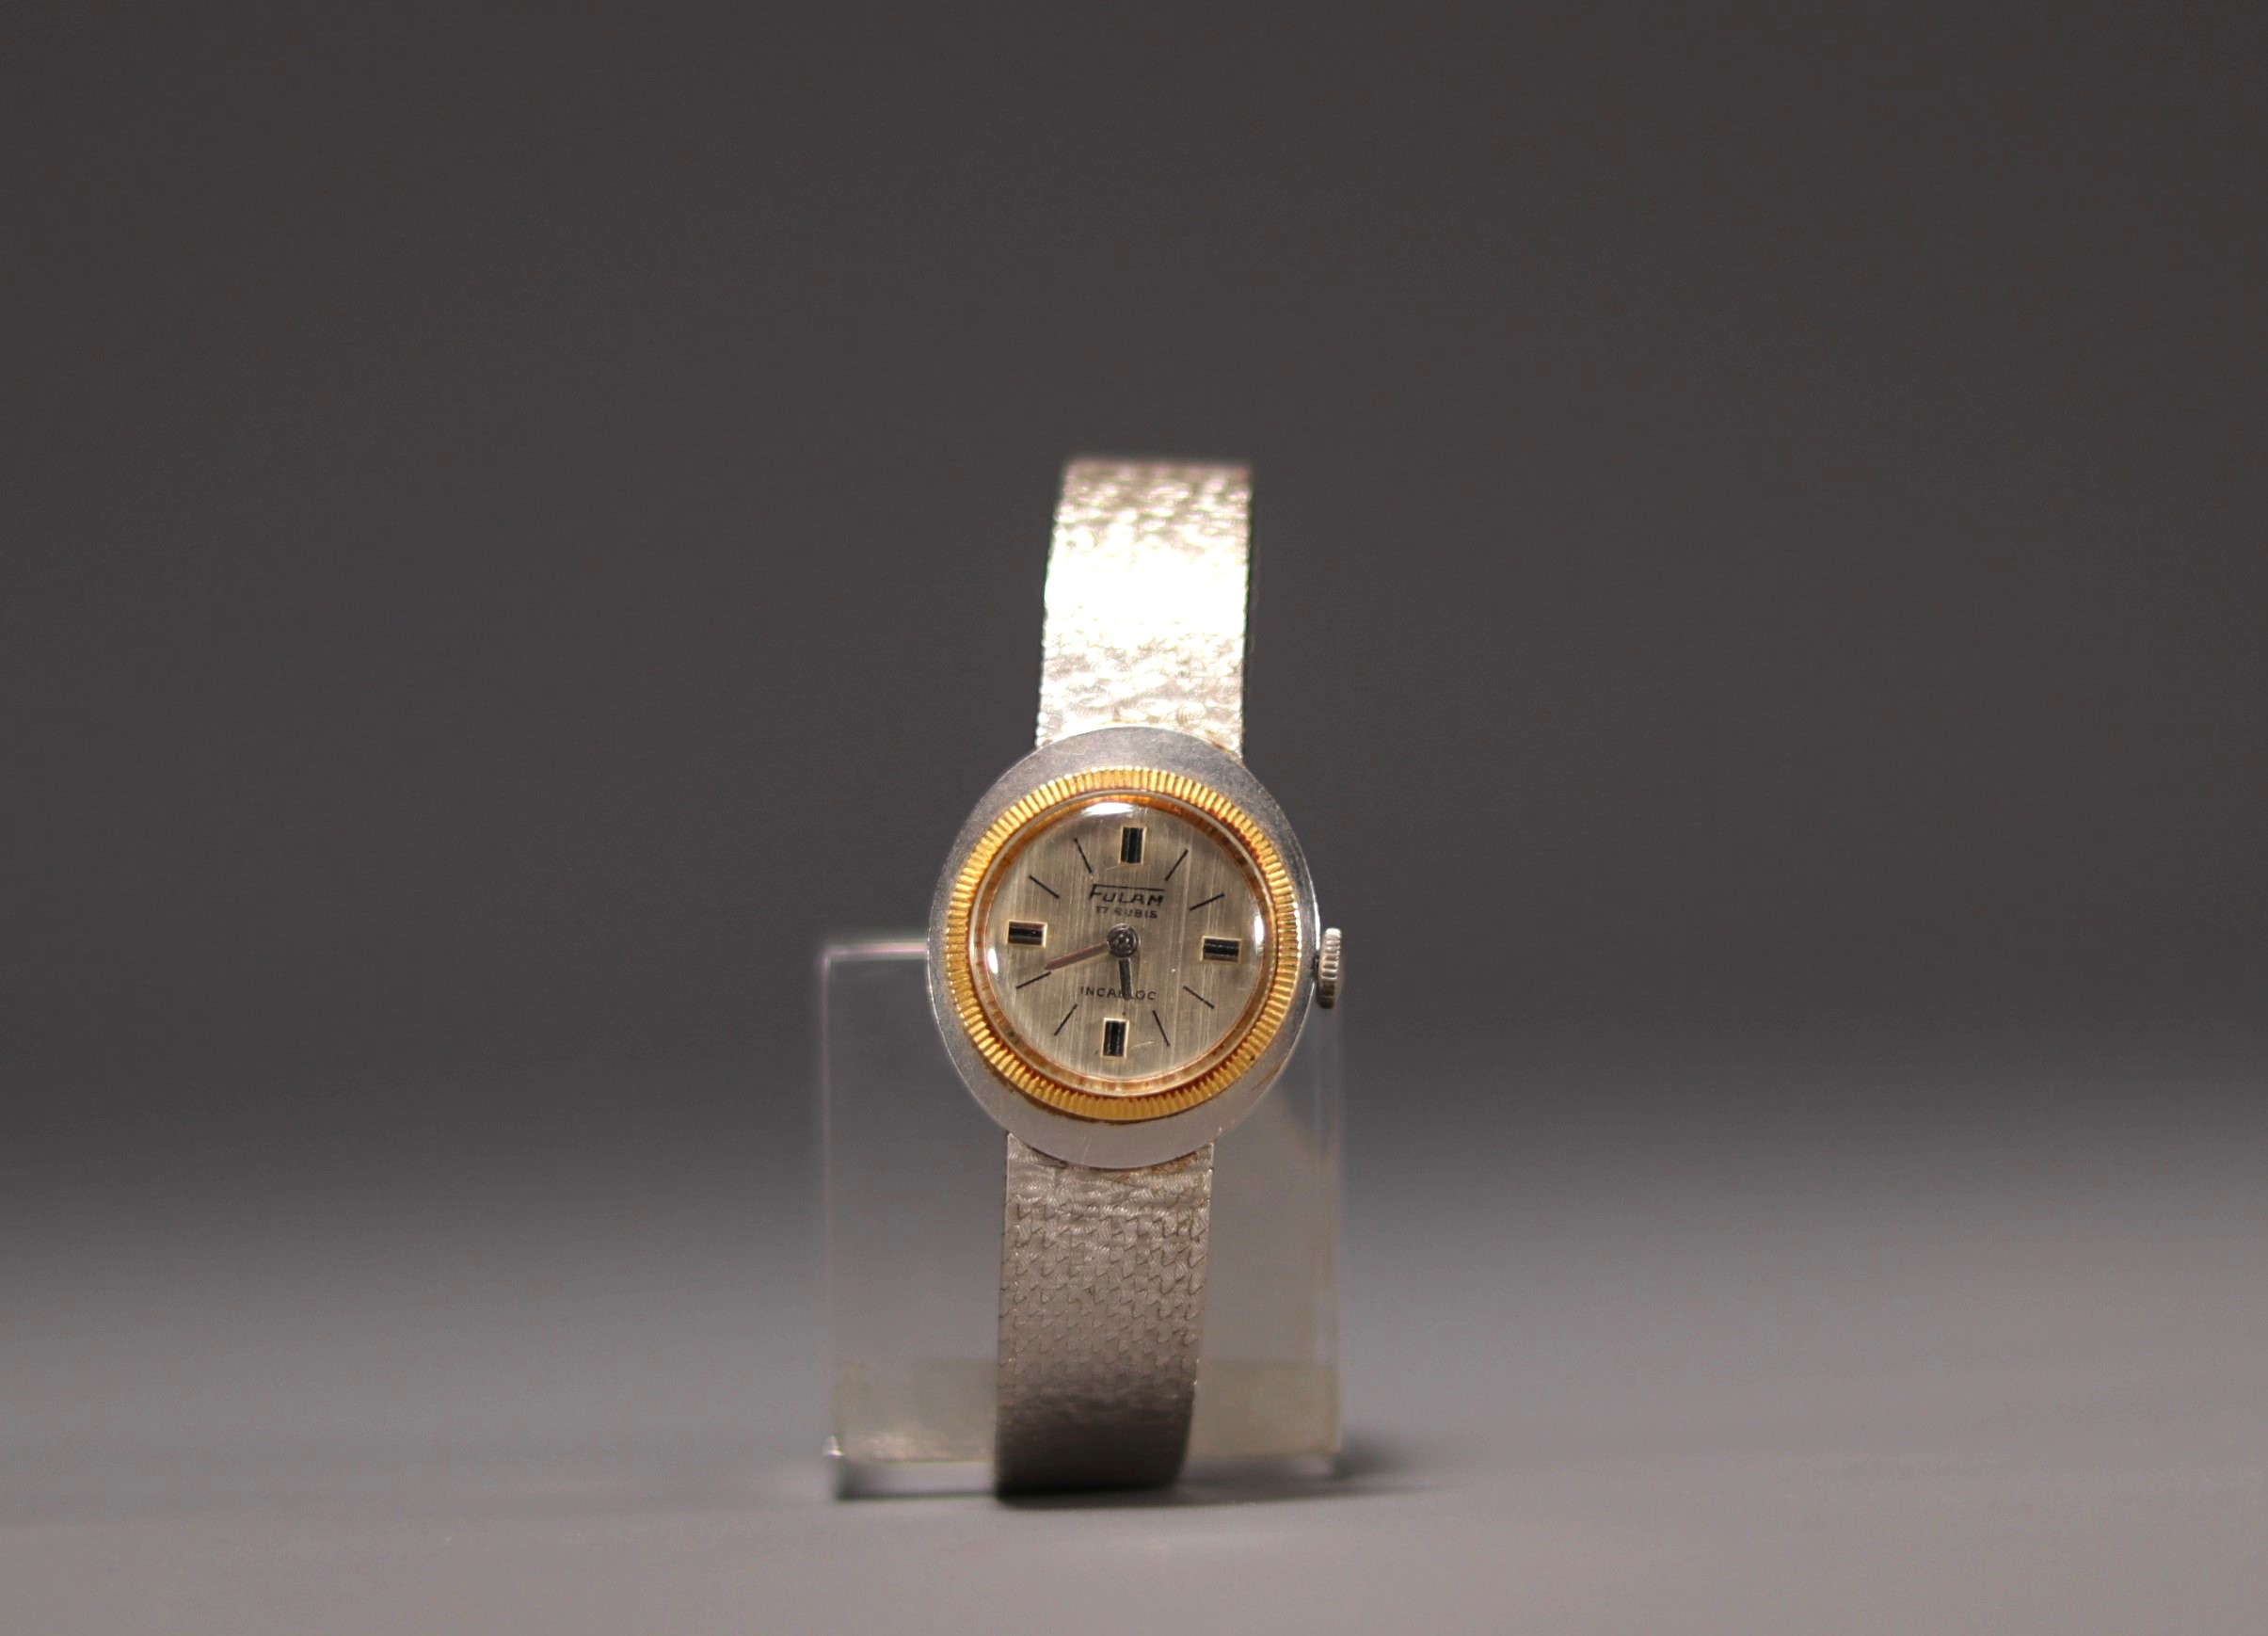 Fulam - Ladies' watch in 18K white and yellow gold weighing 38.3 grams. - Image 3 of 3